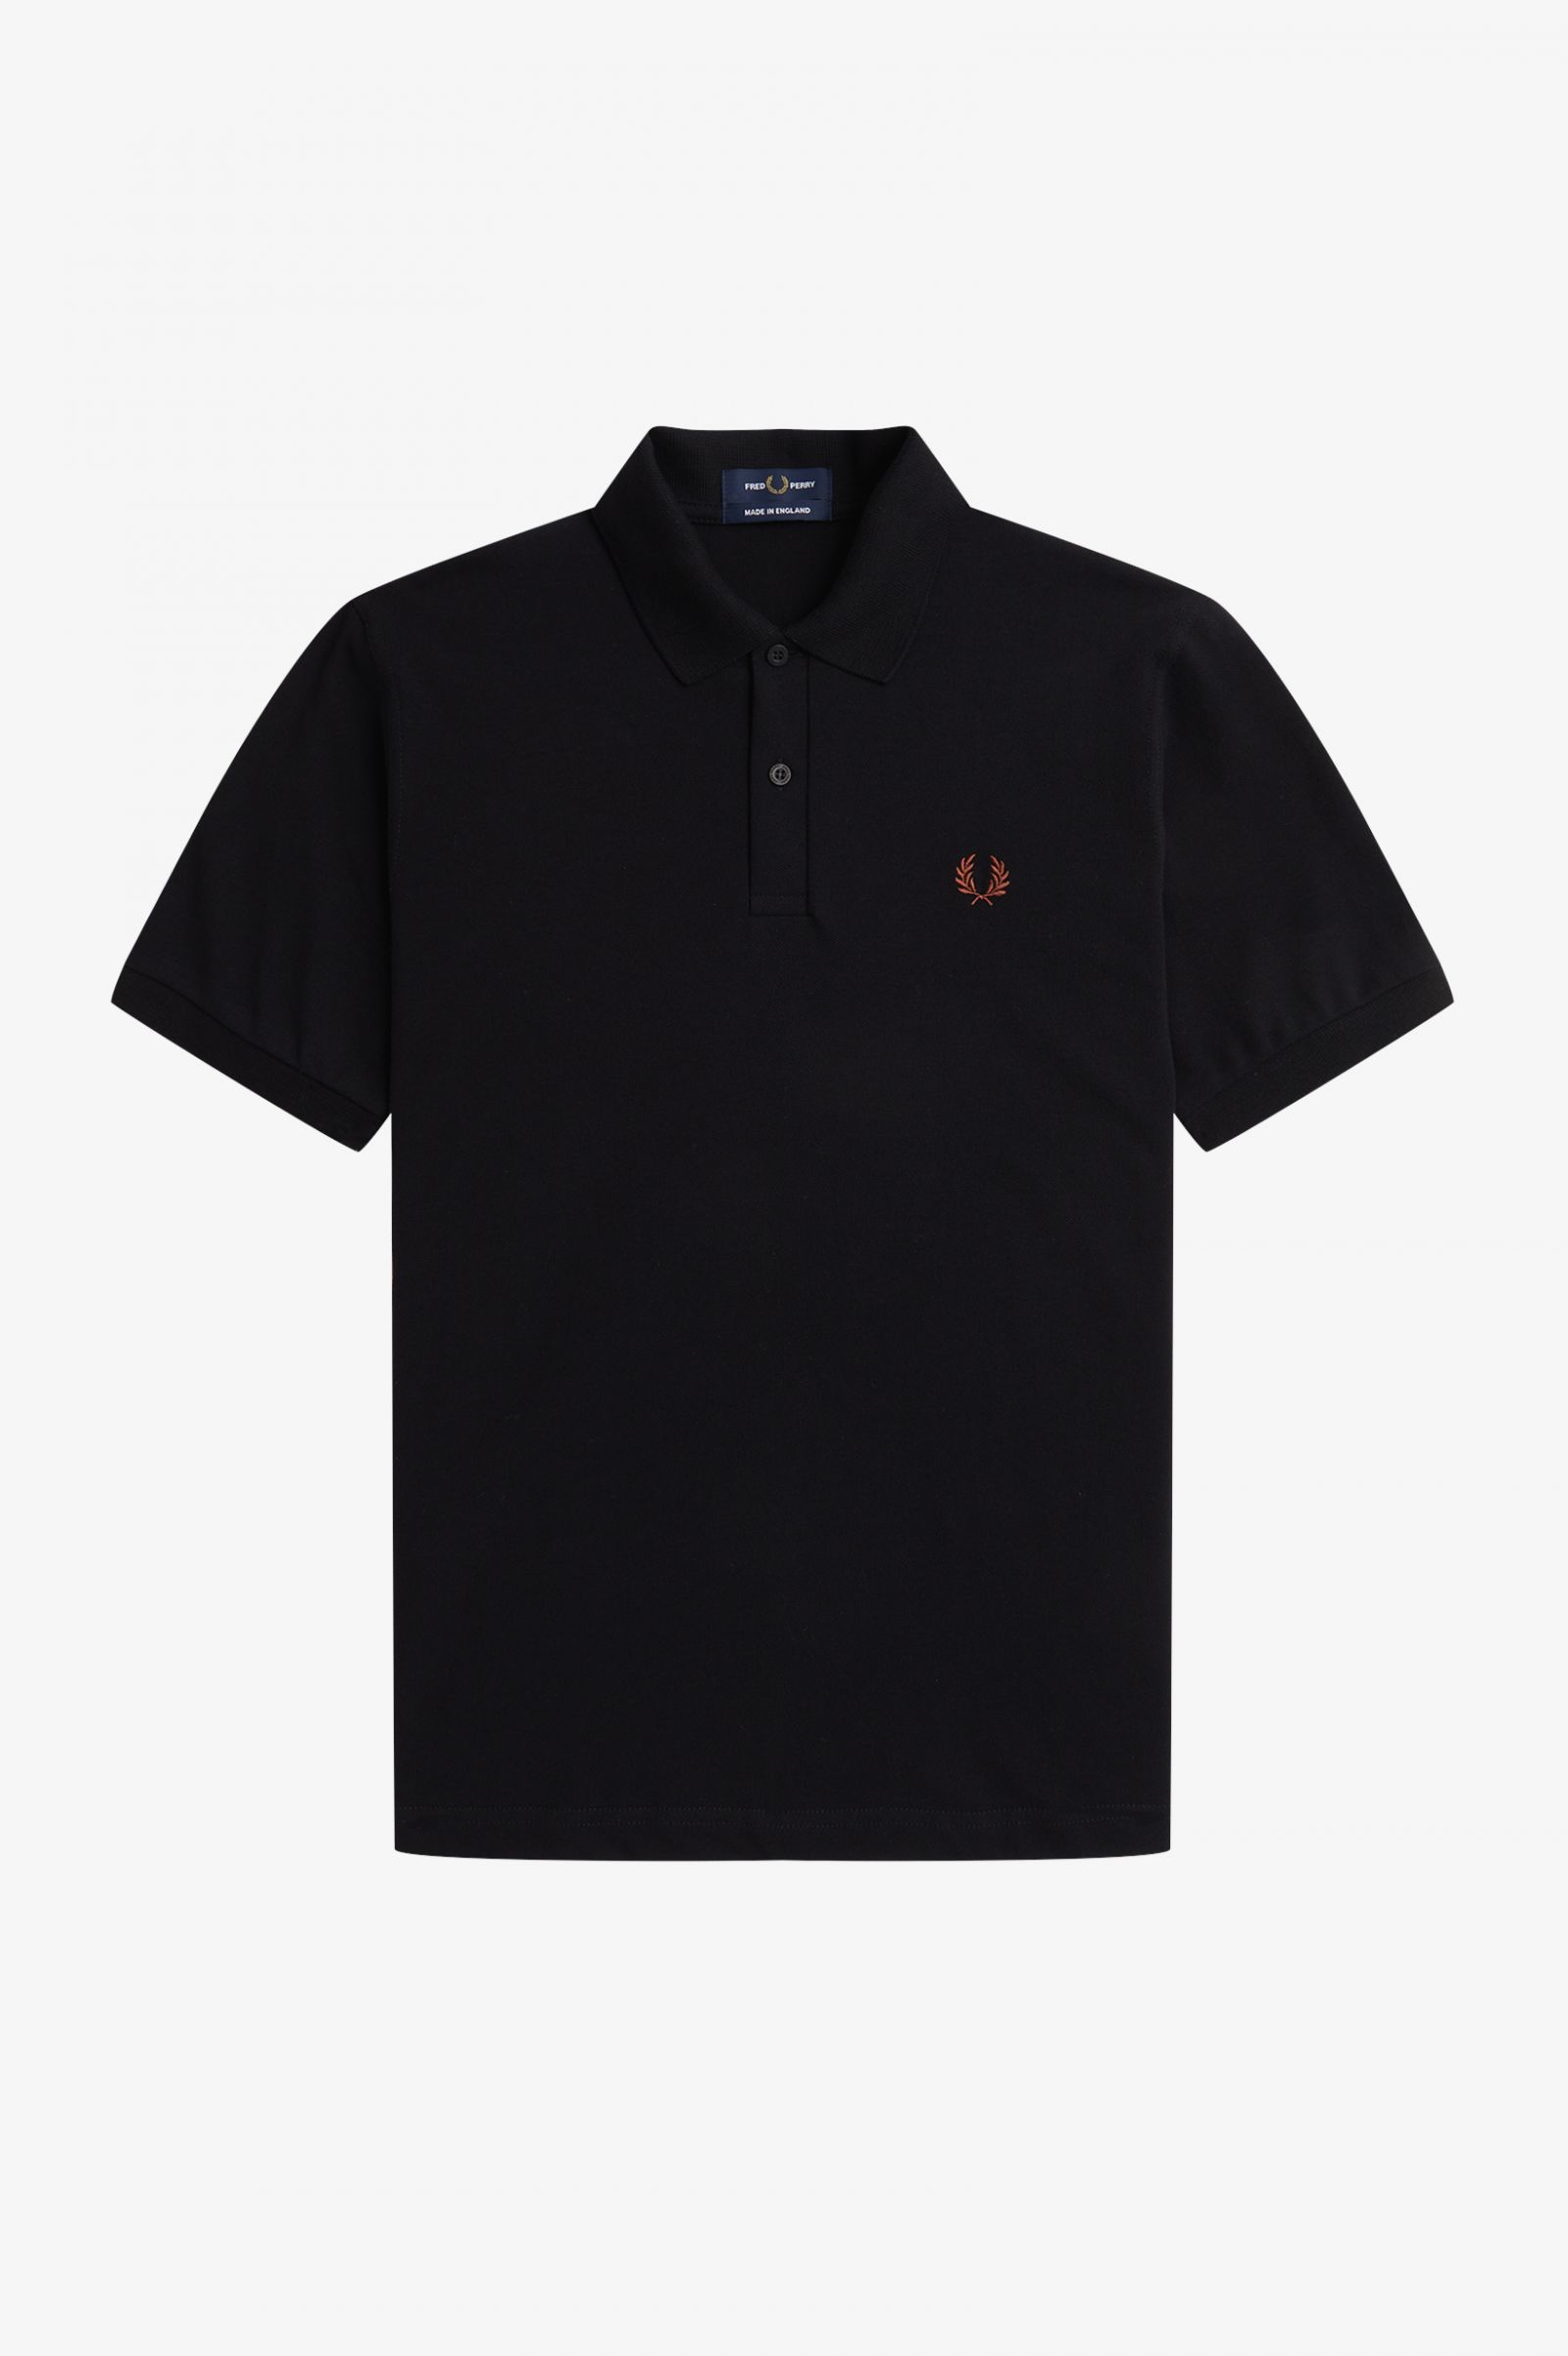 Fred Perry The Original Fred Perry Shirt in Black